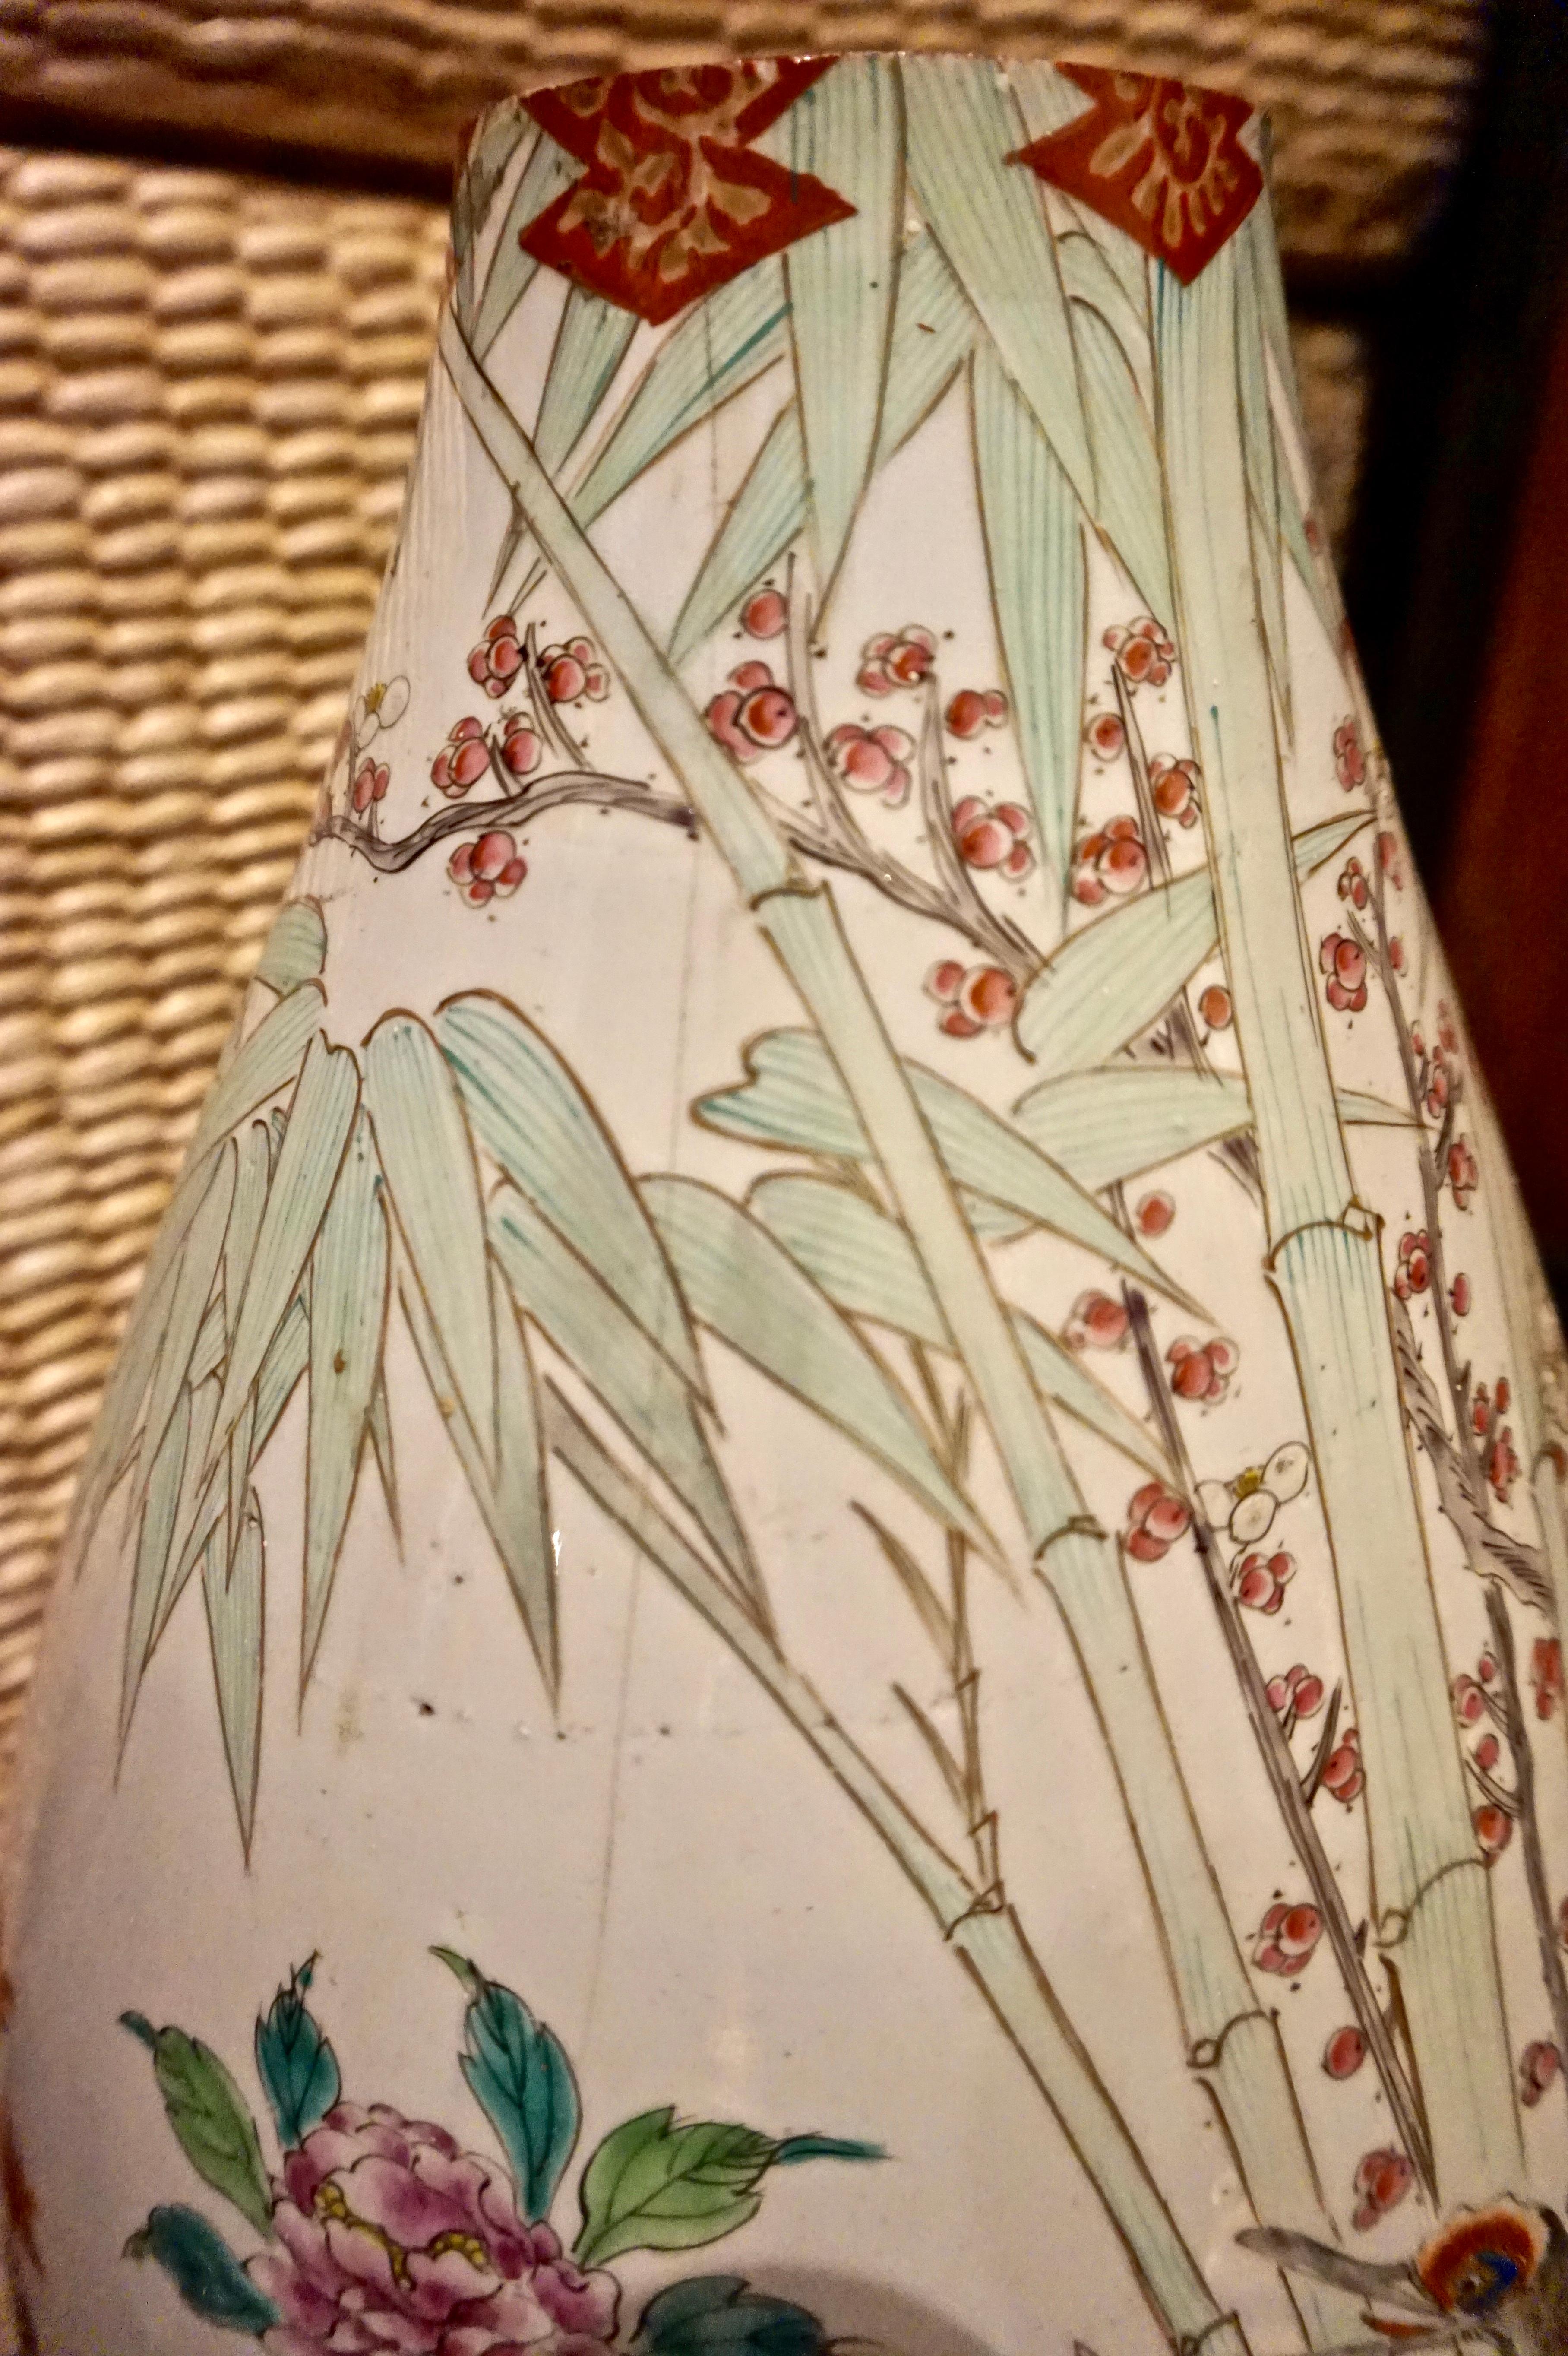 Ceramic 19th Century Handmade Large Japanese Conical Vase with Cranes and Foliage